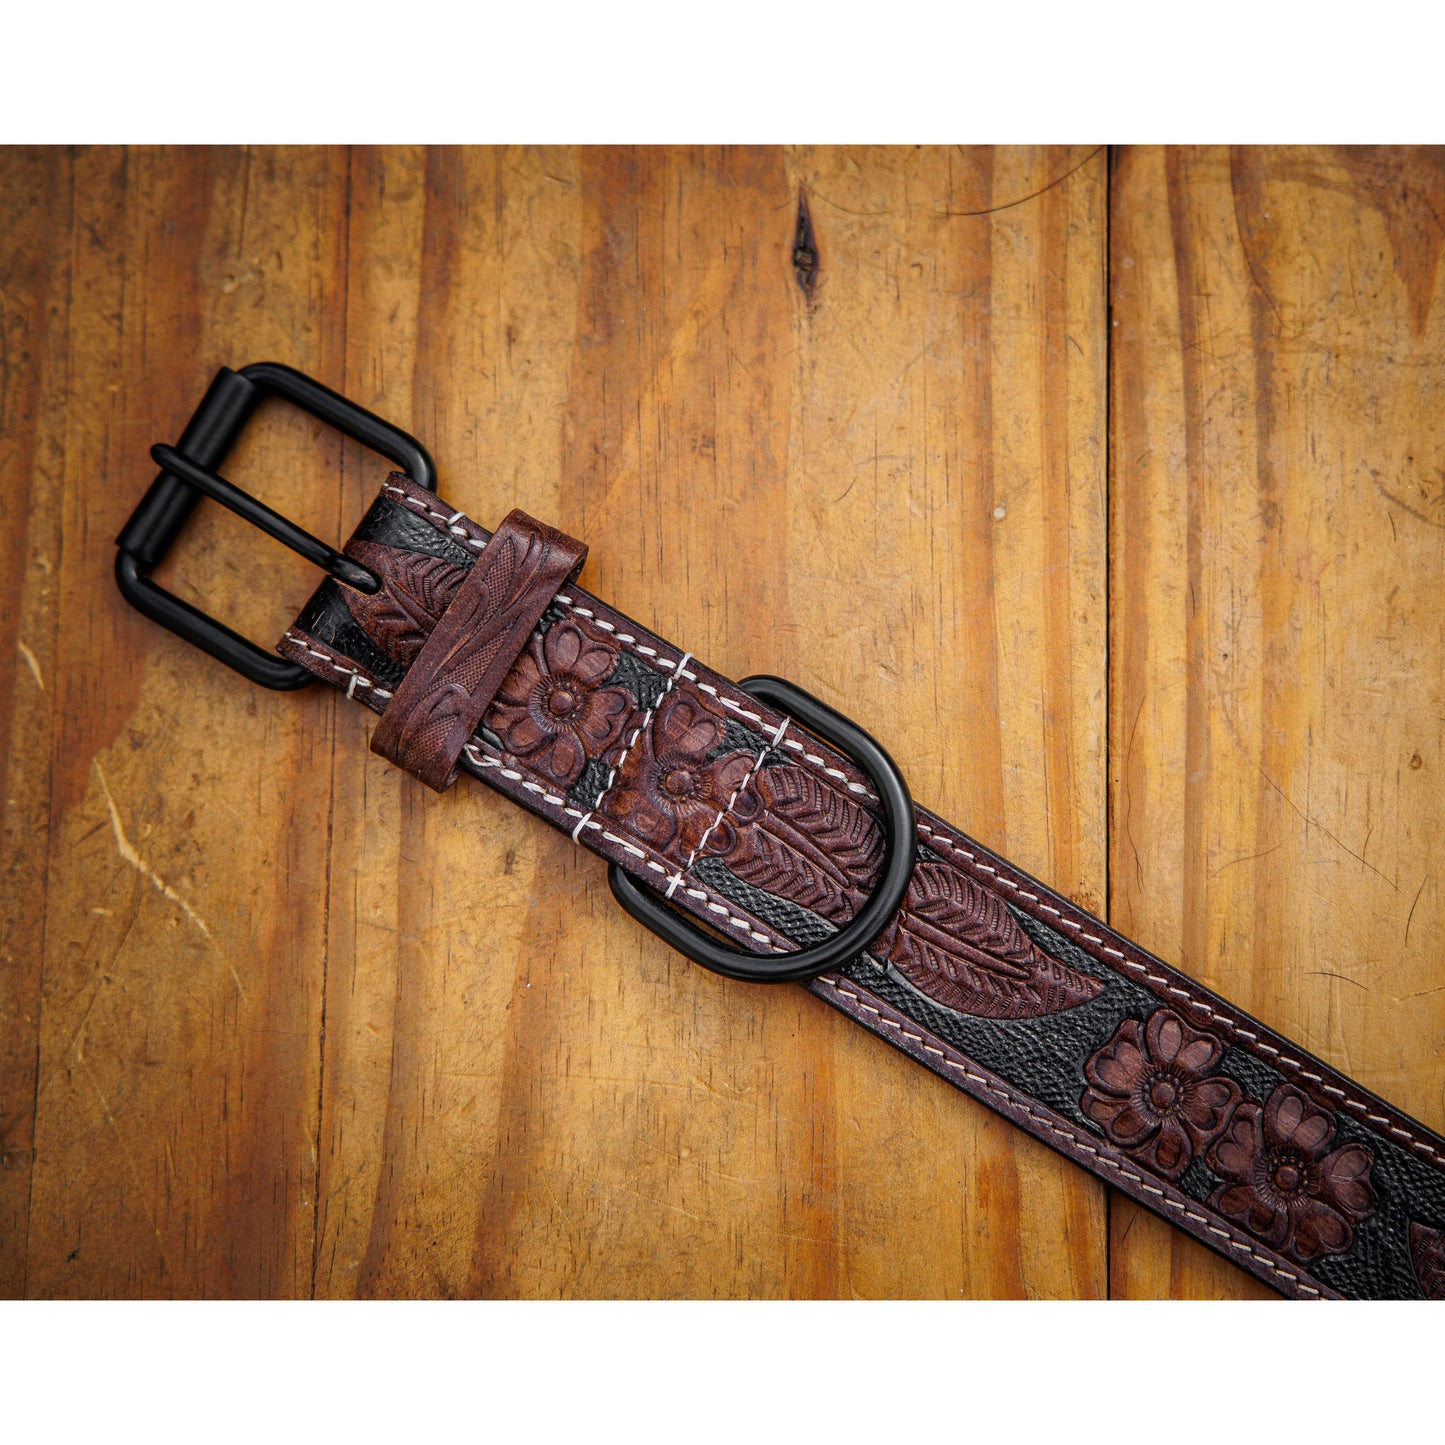 Ay'e Chihuahaua! Tooled Leather Western Dog Collar